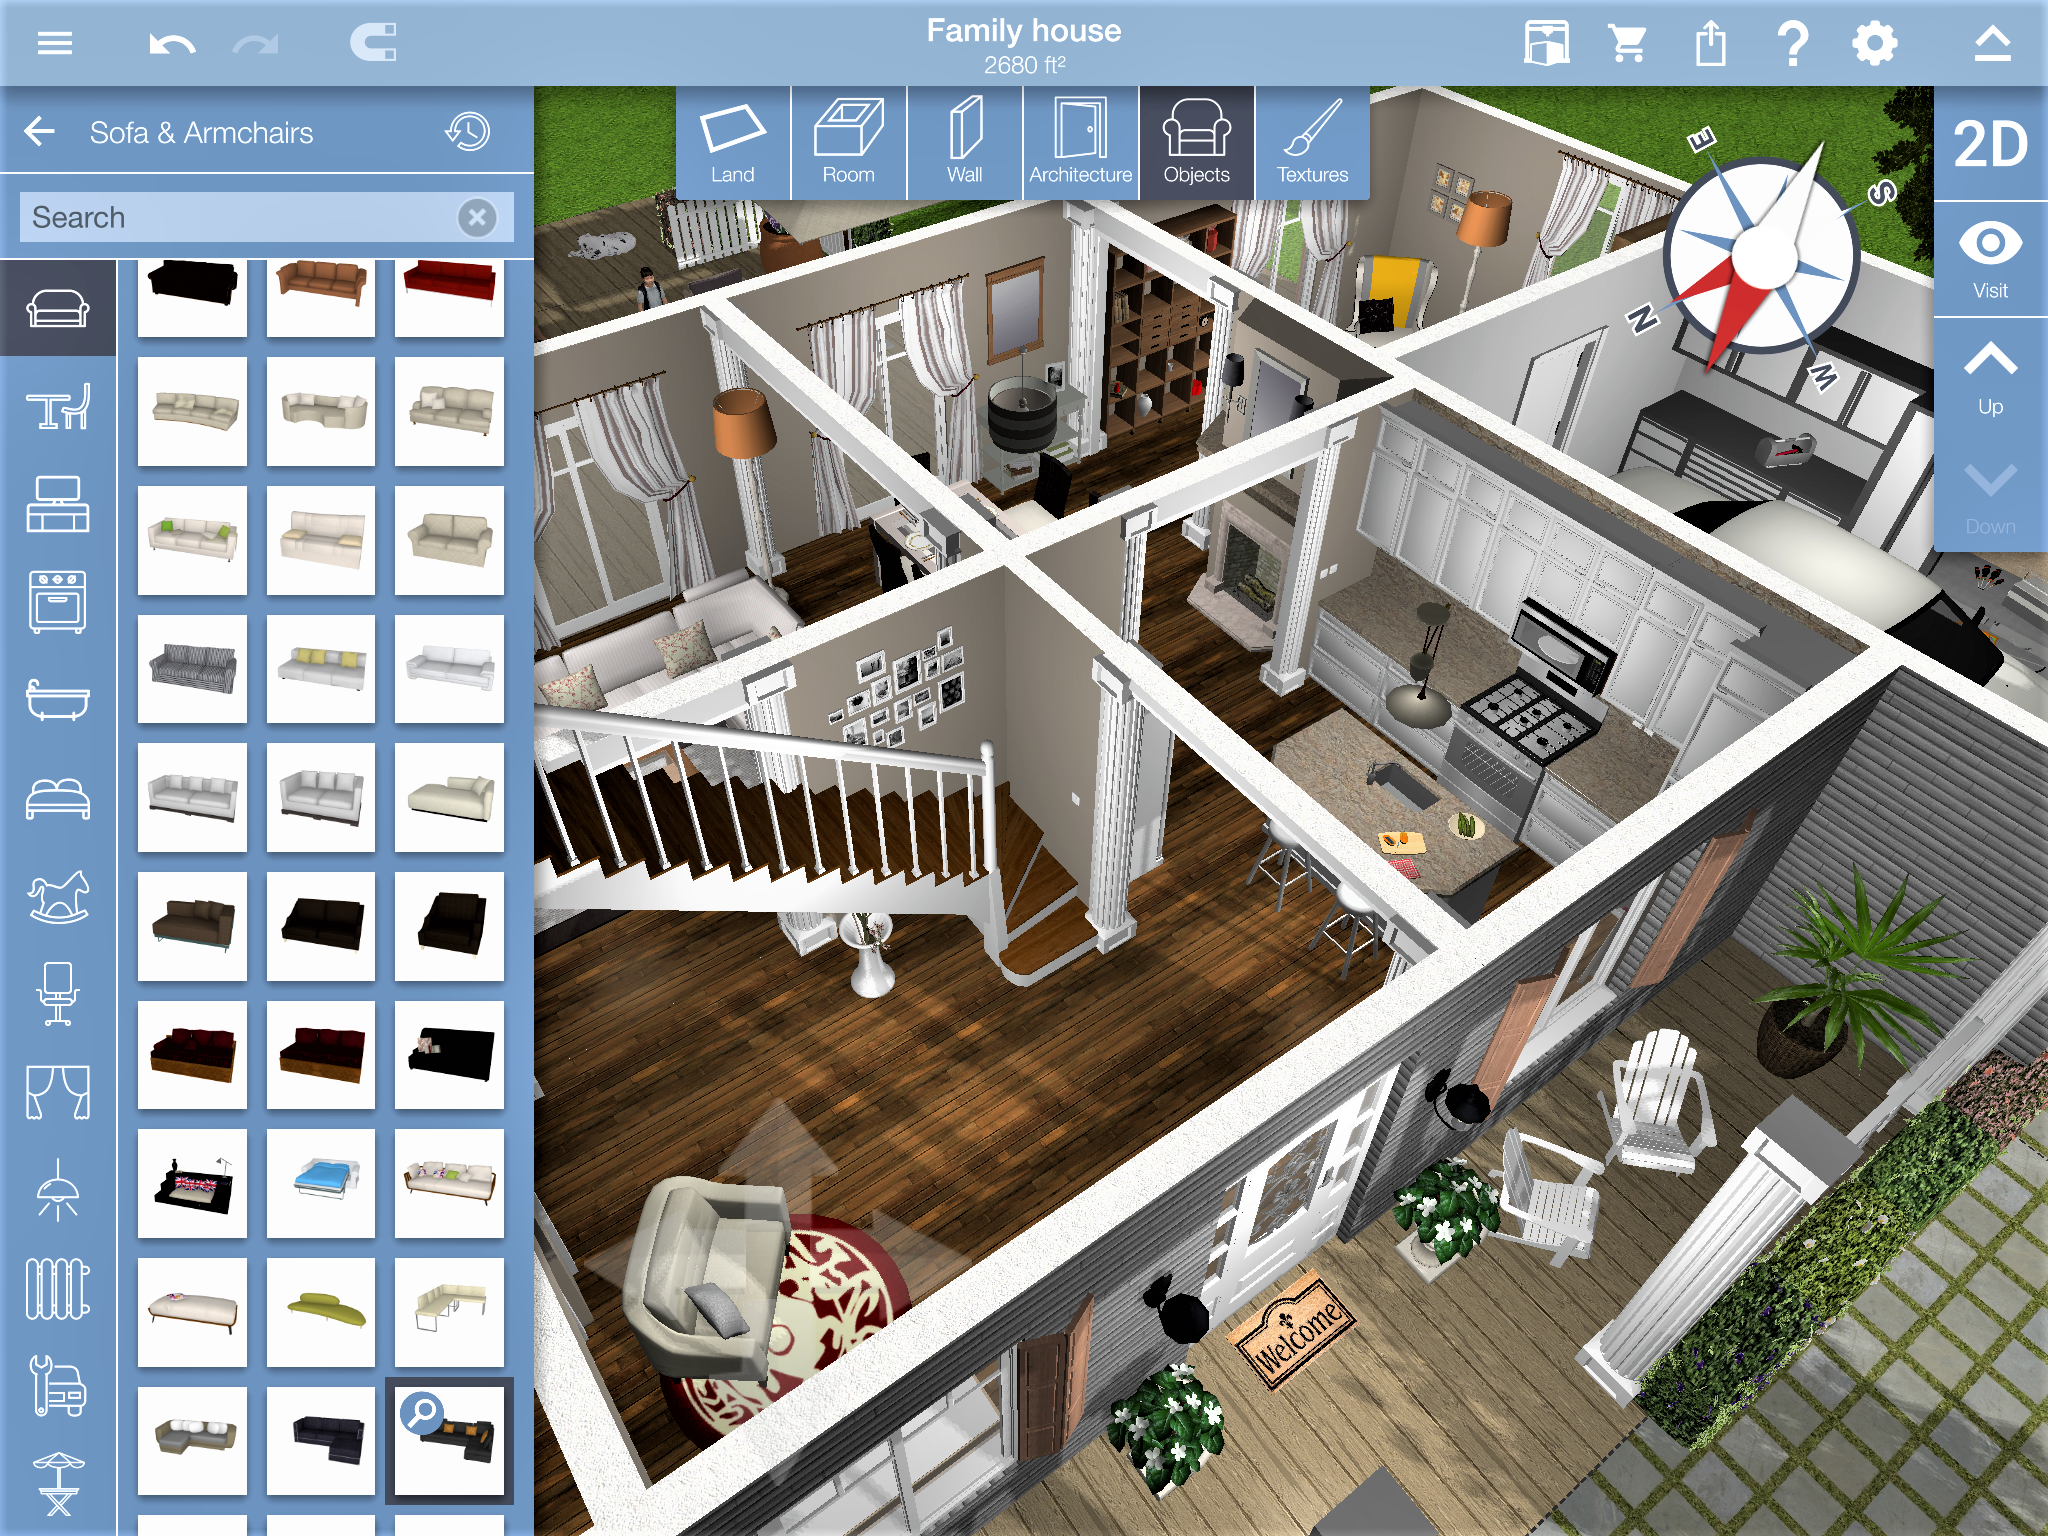 10 Home Design Apps That’ll Make You Feel Like an Interior